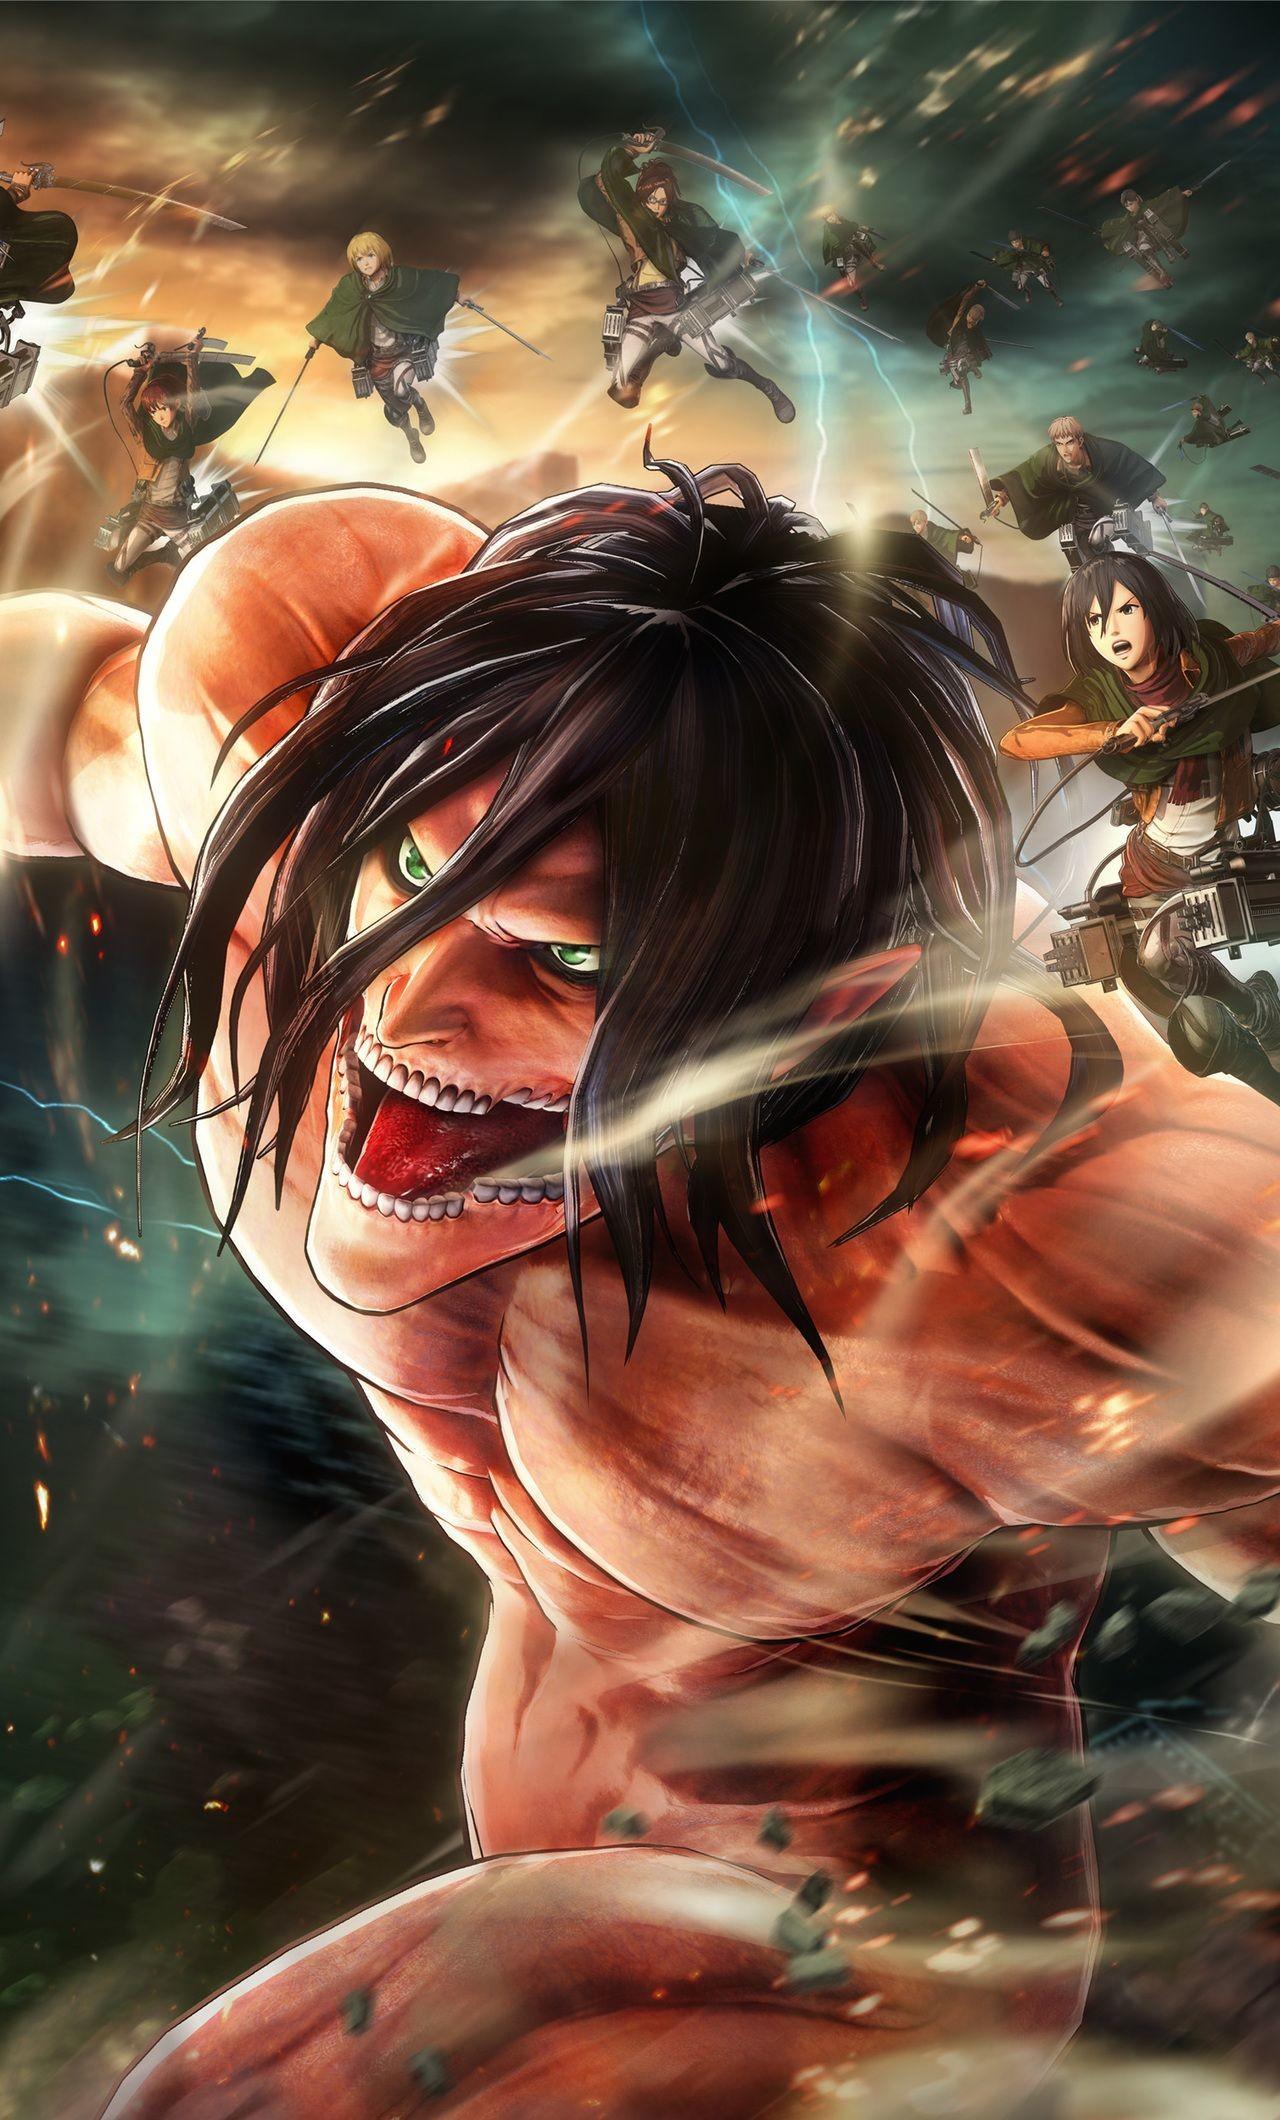 Attack On Titan 4k Android Wallpapers - Wallpaper Cave